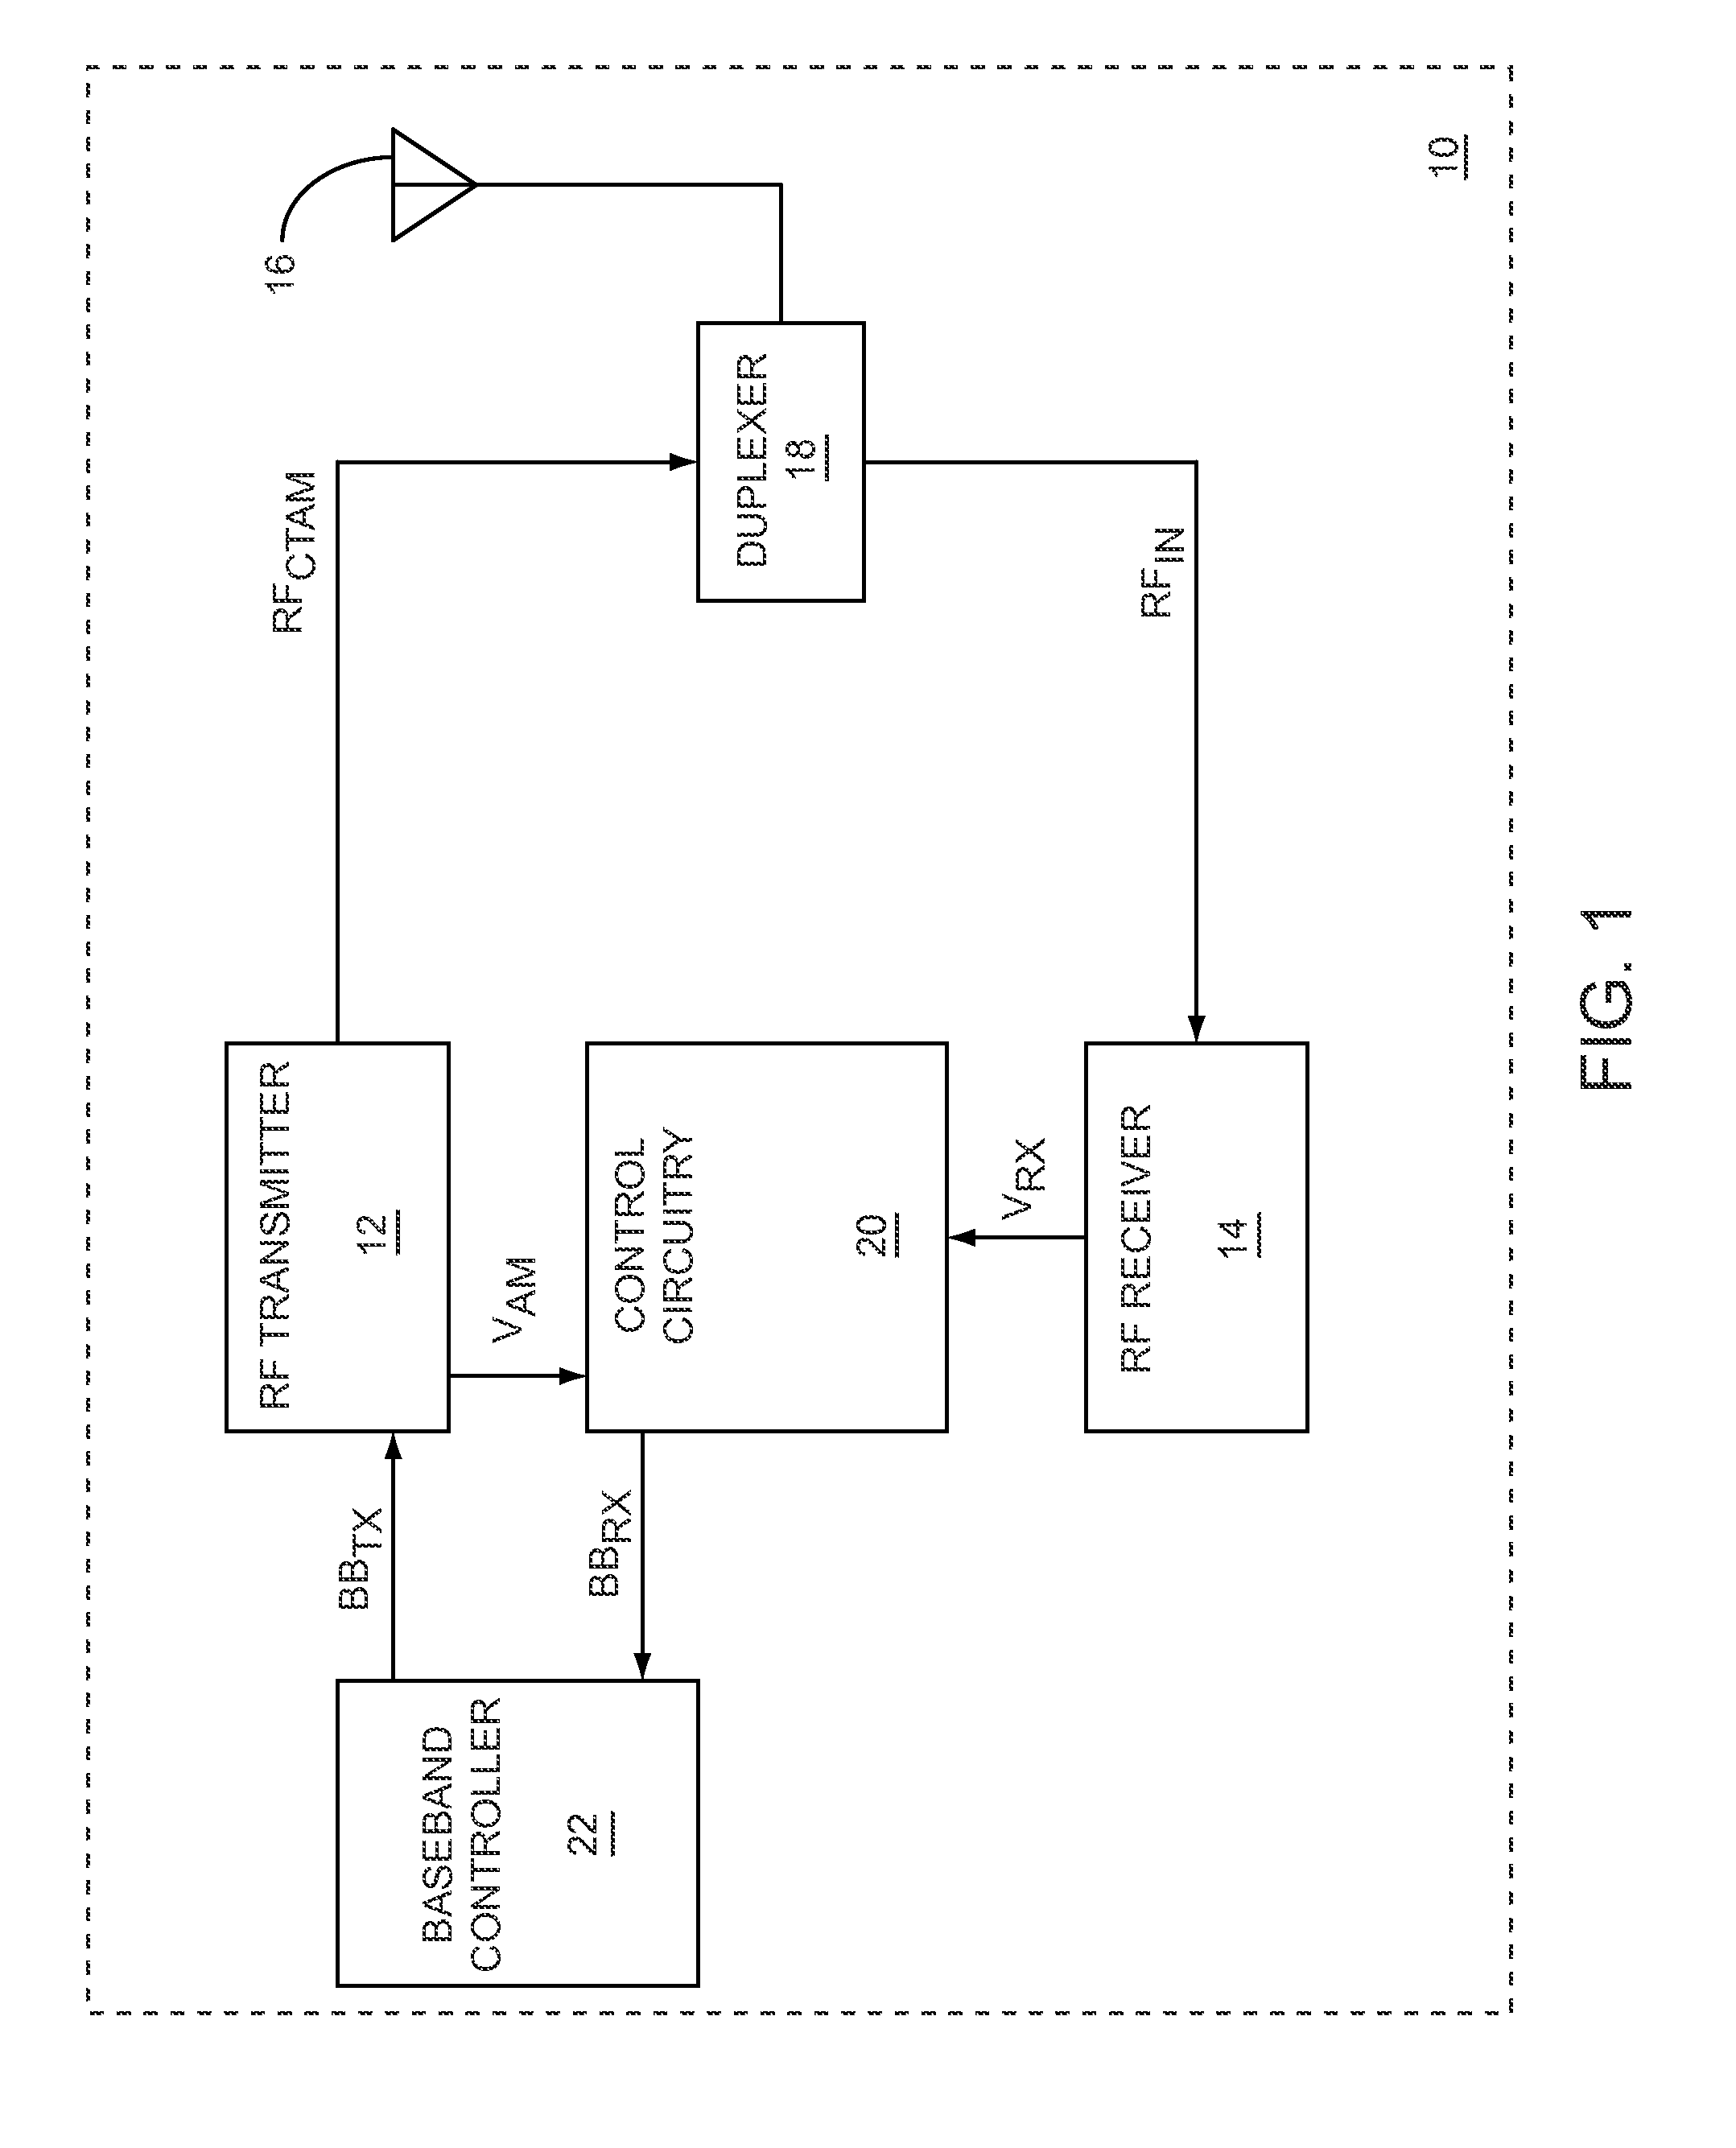 DC offset correction of a power detector used with a continuous transmission radio frequency signal